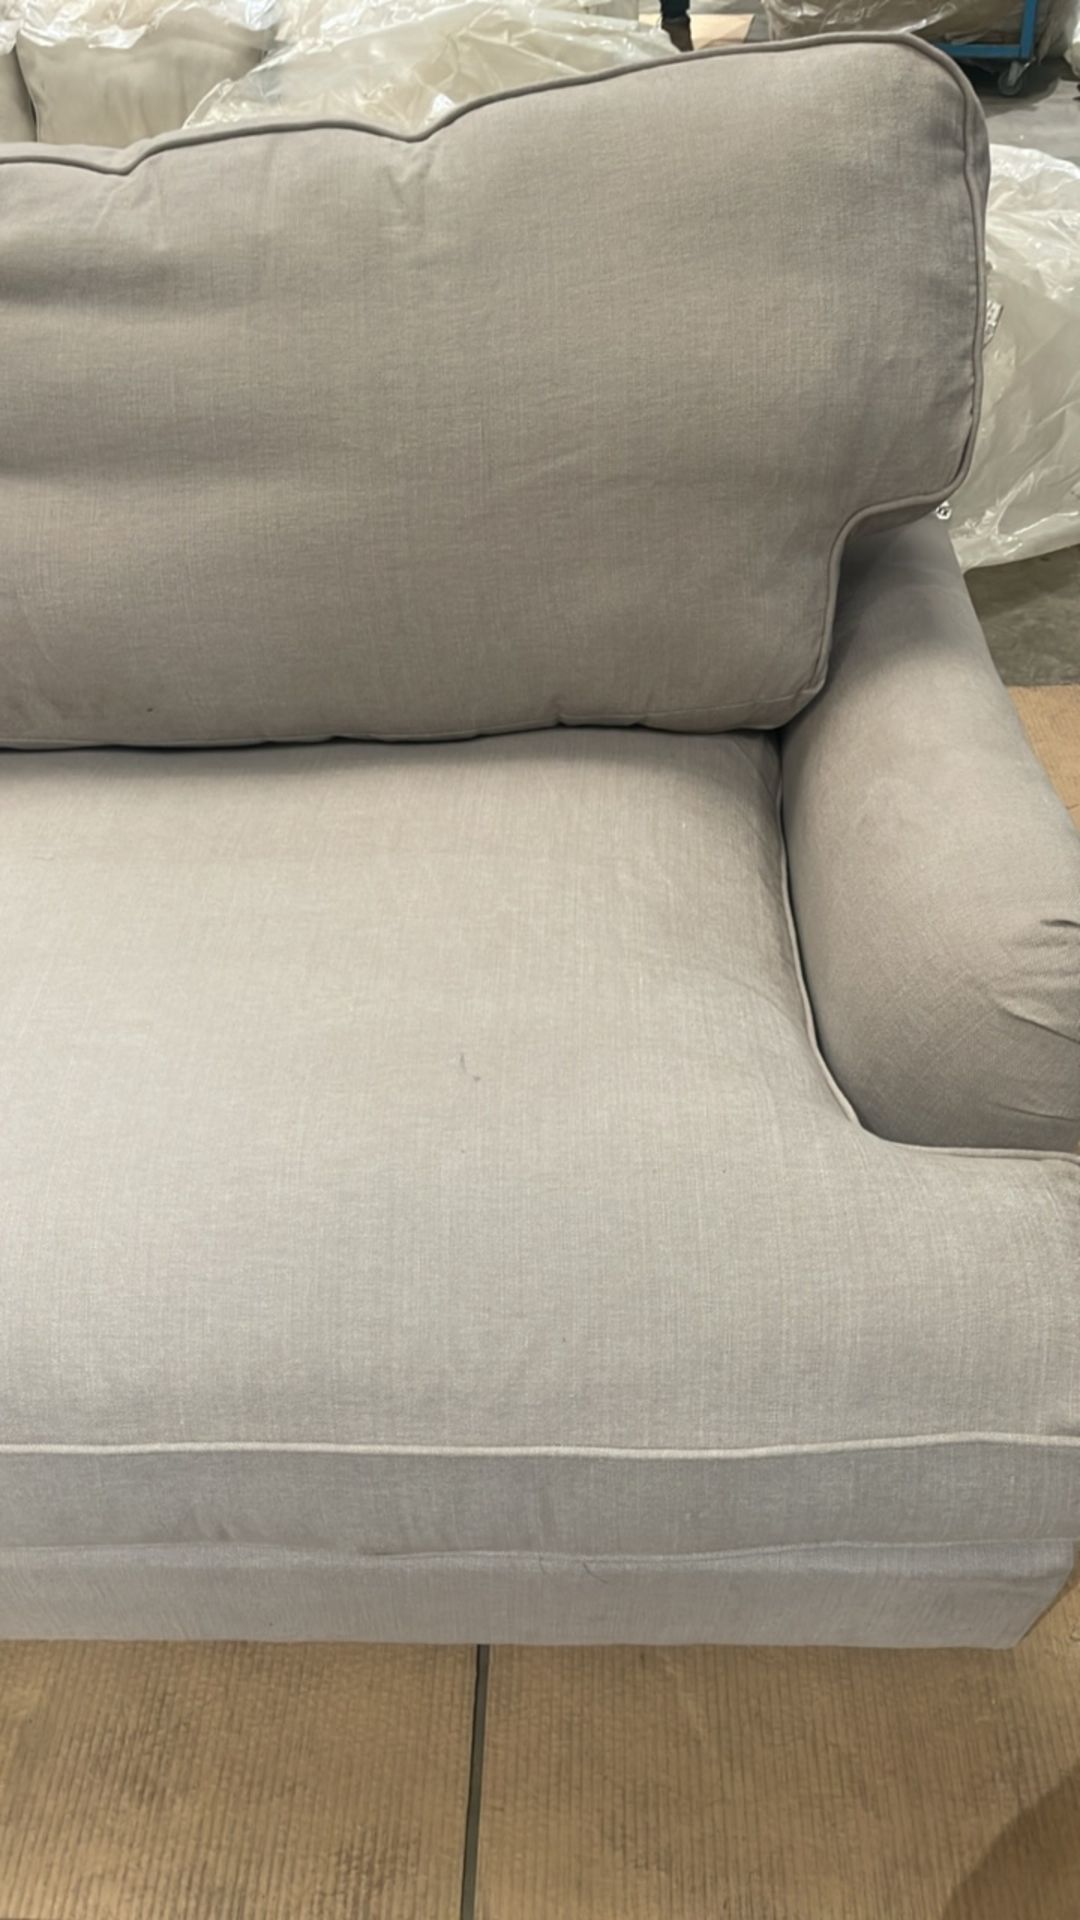 Bluebell 3 Seat Sofa Bed In Stone Brushed Linen Cotton RRP - £2620 - Image 3 of 8